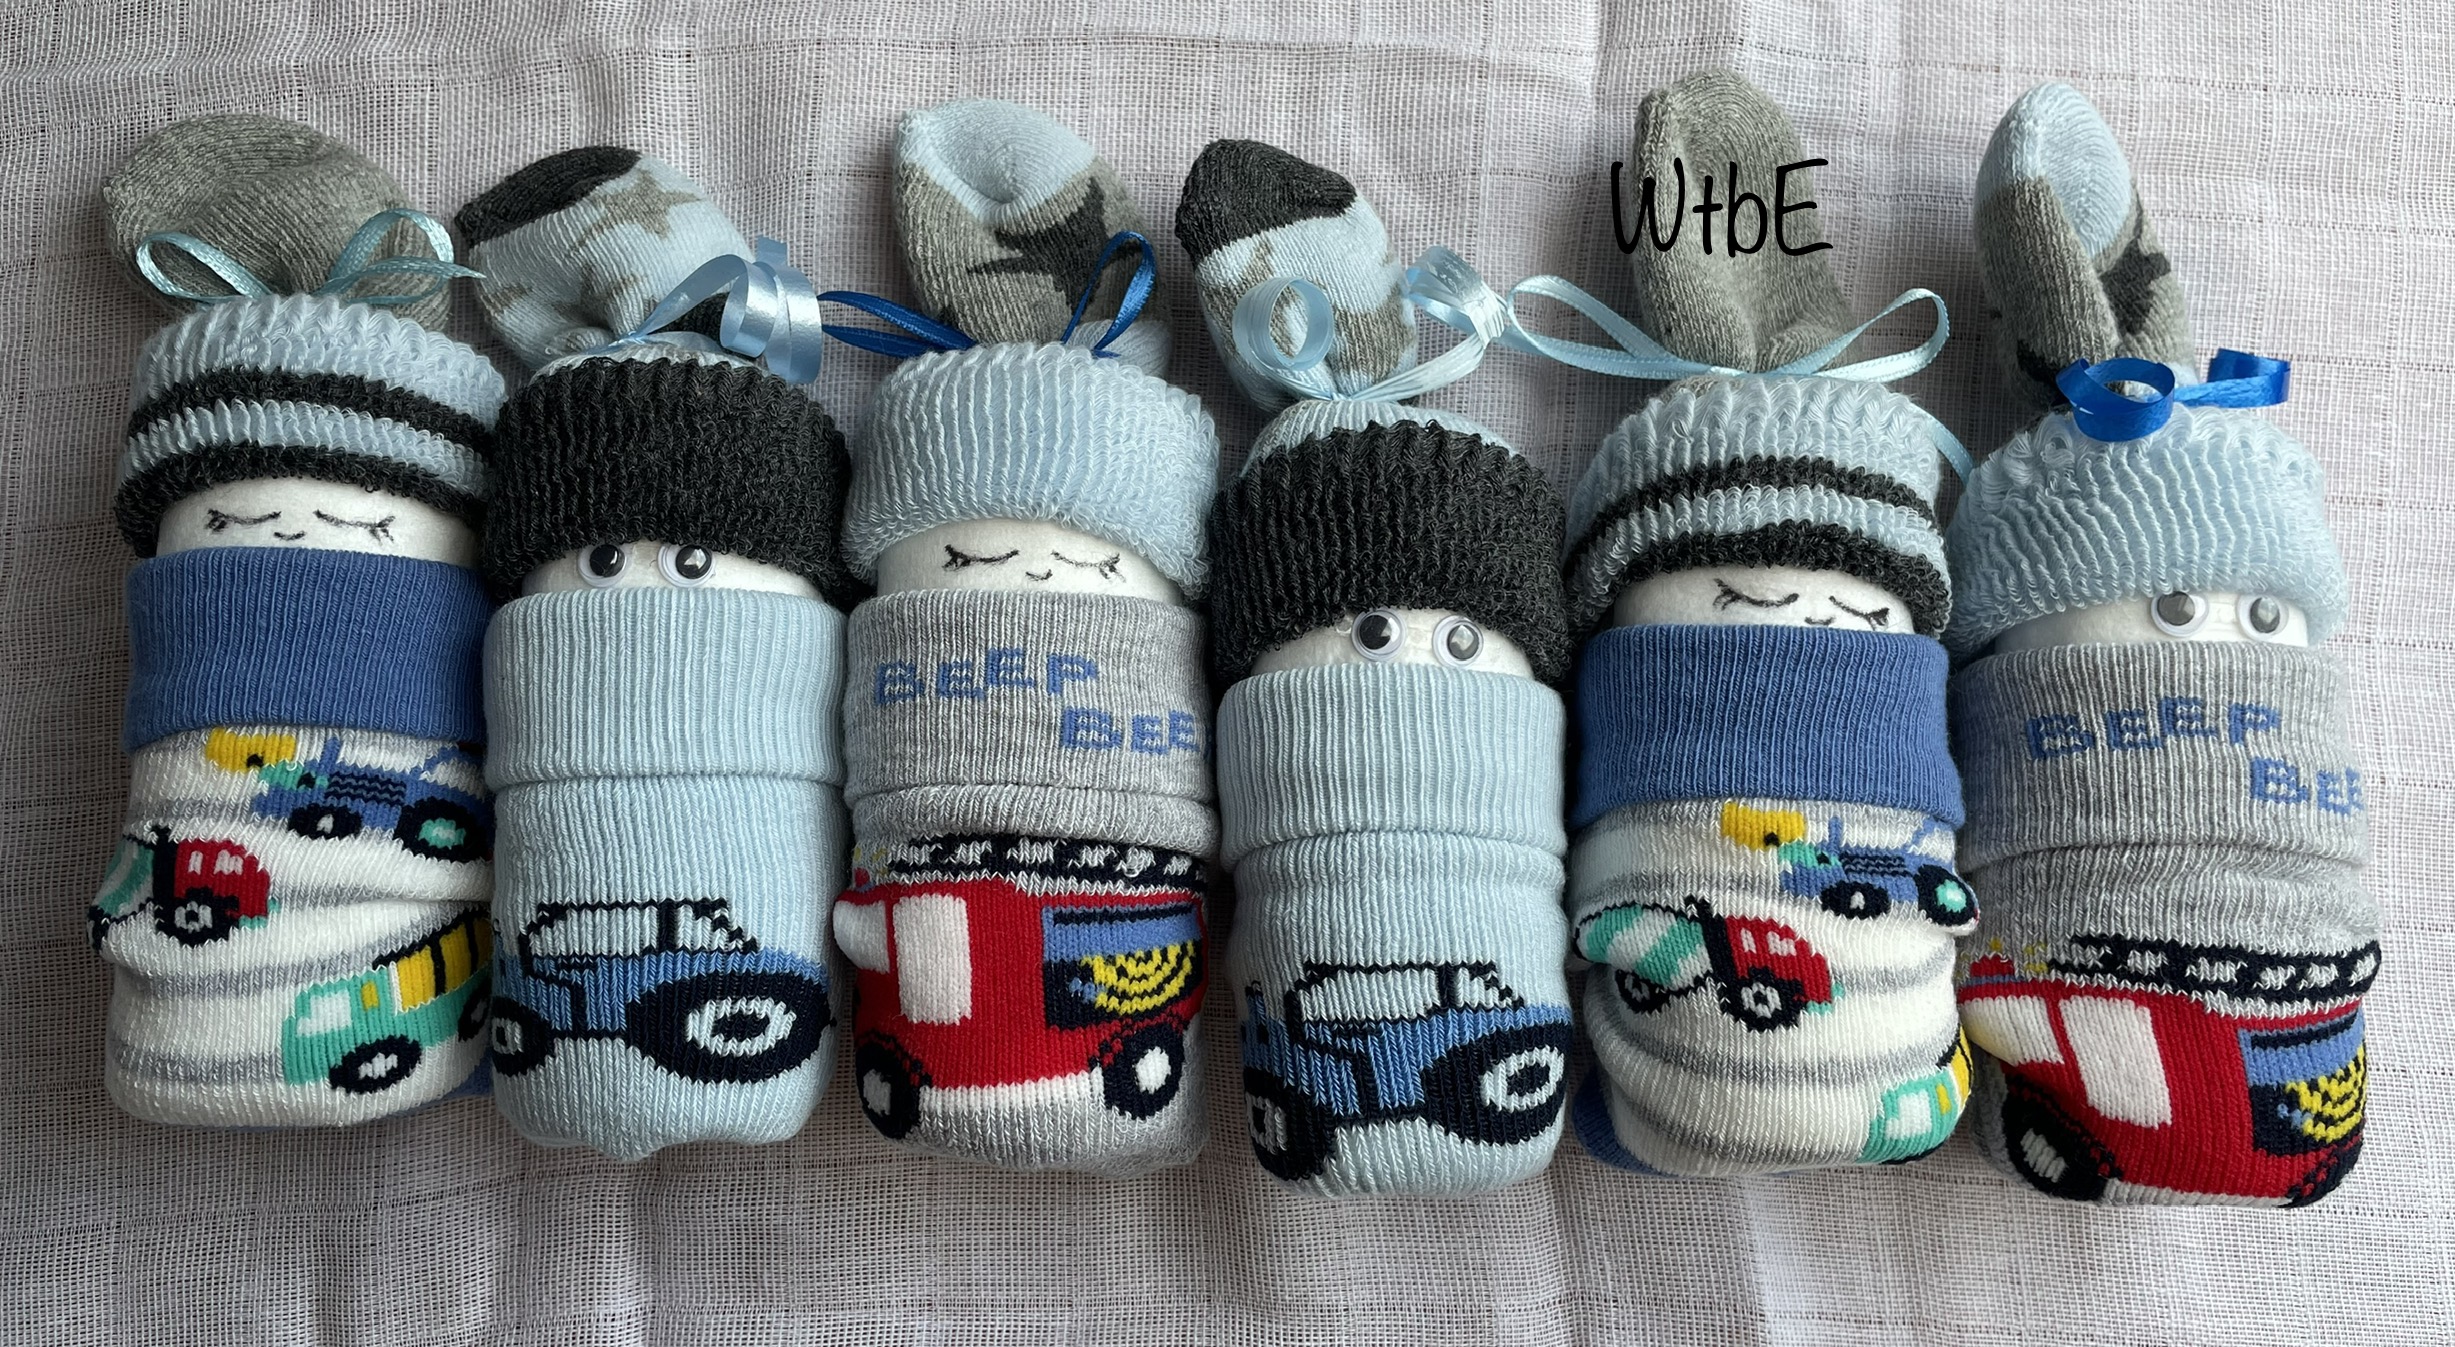 sock diaper babies for boys, 6 diaper babies laid, made of only socks, socks have car designs